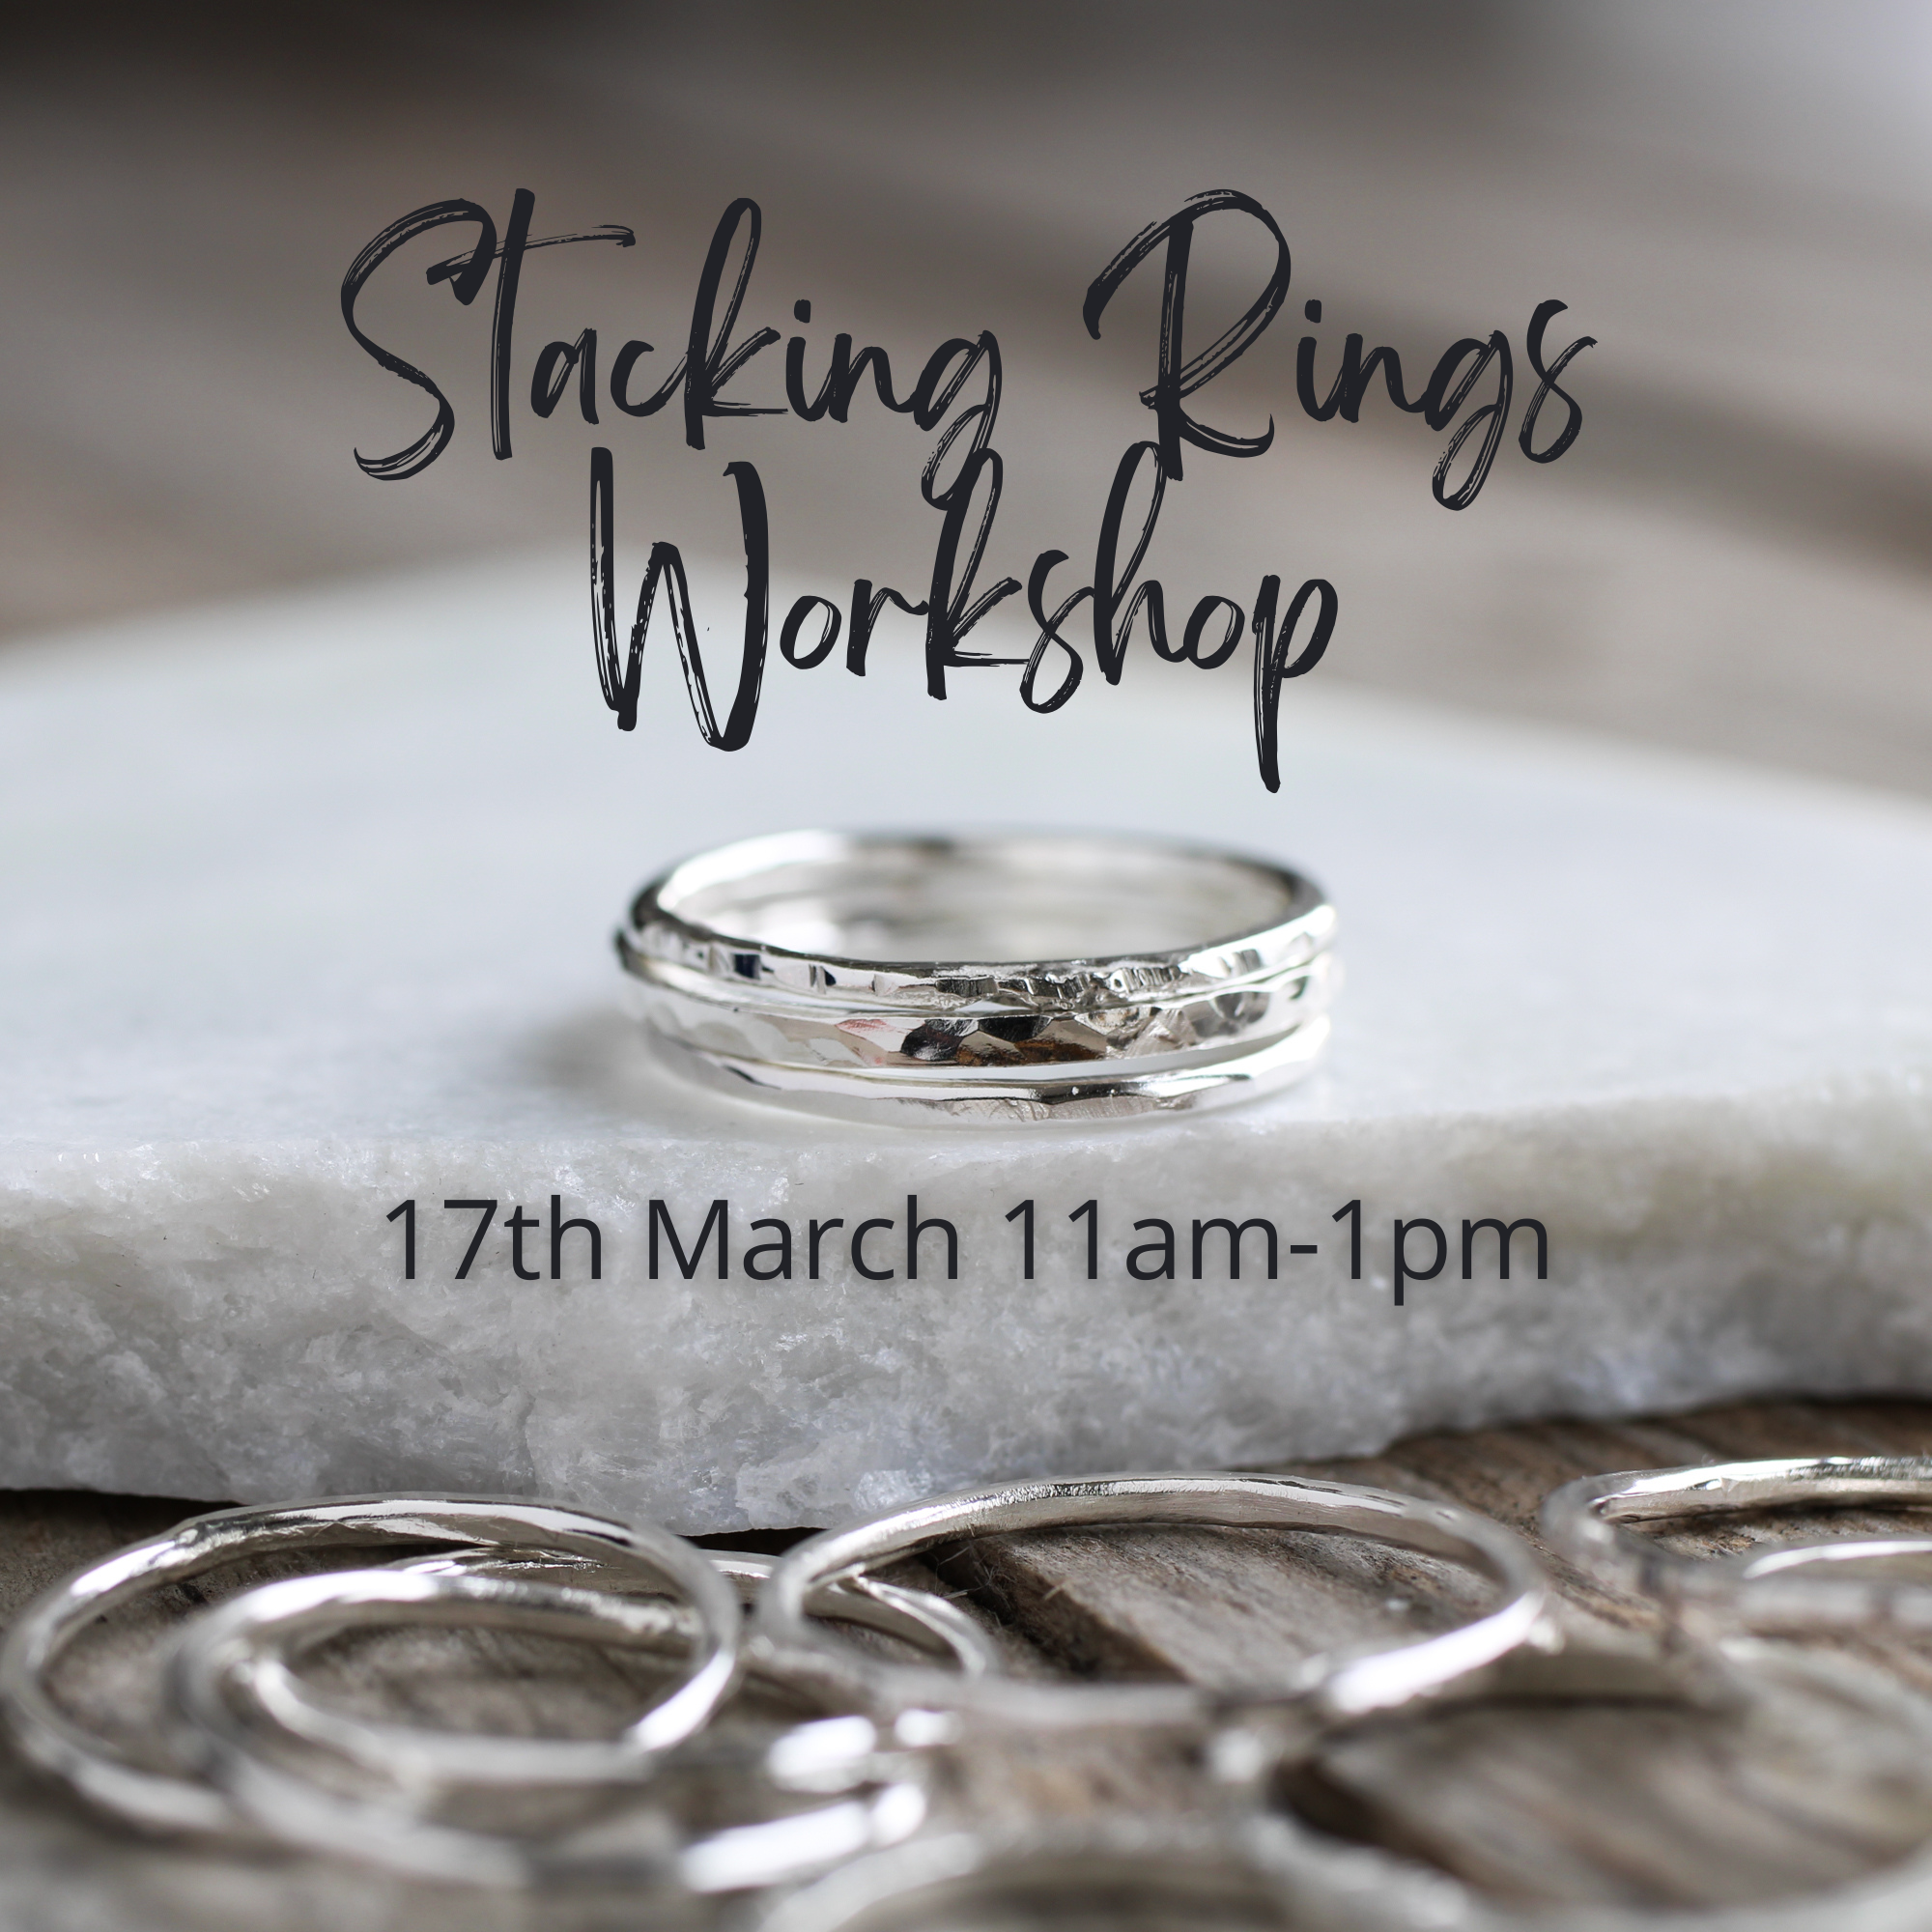 silver ring making workshop, aimi cairns jewellery, milton of crathes, jewellery classes aberdeen